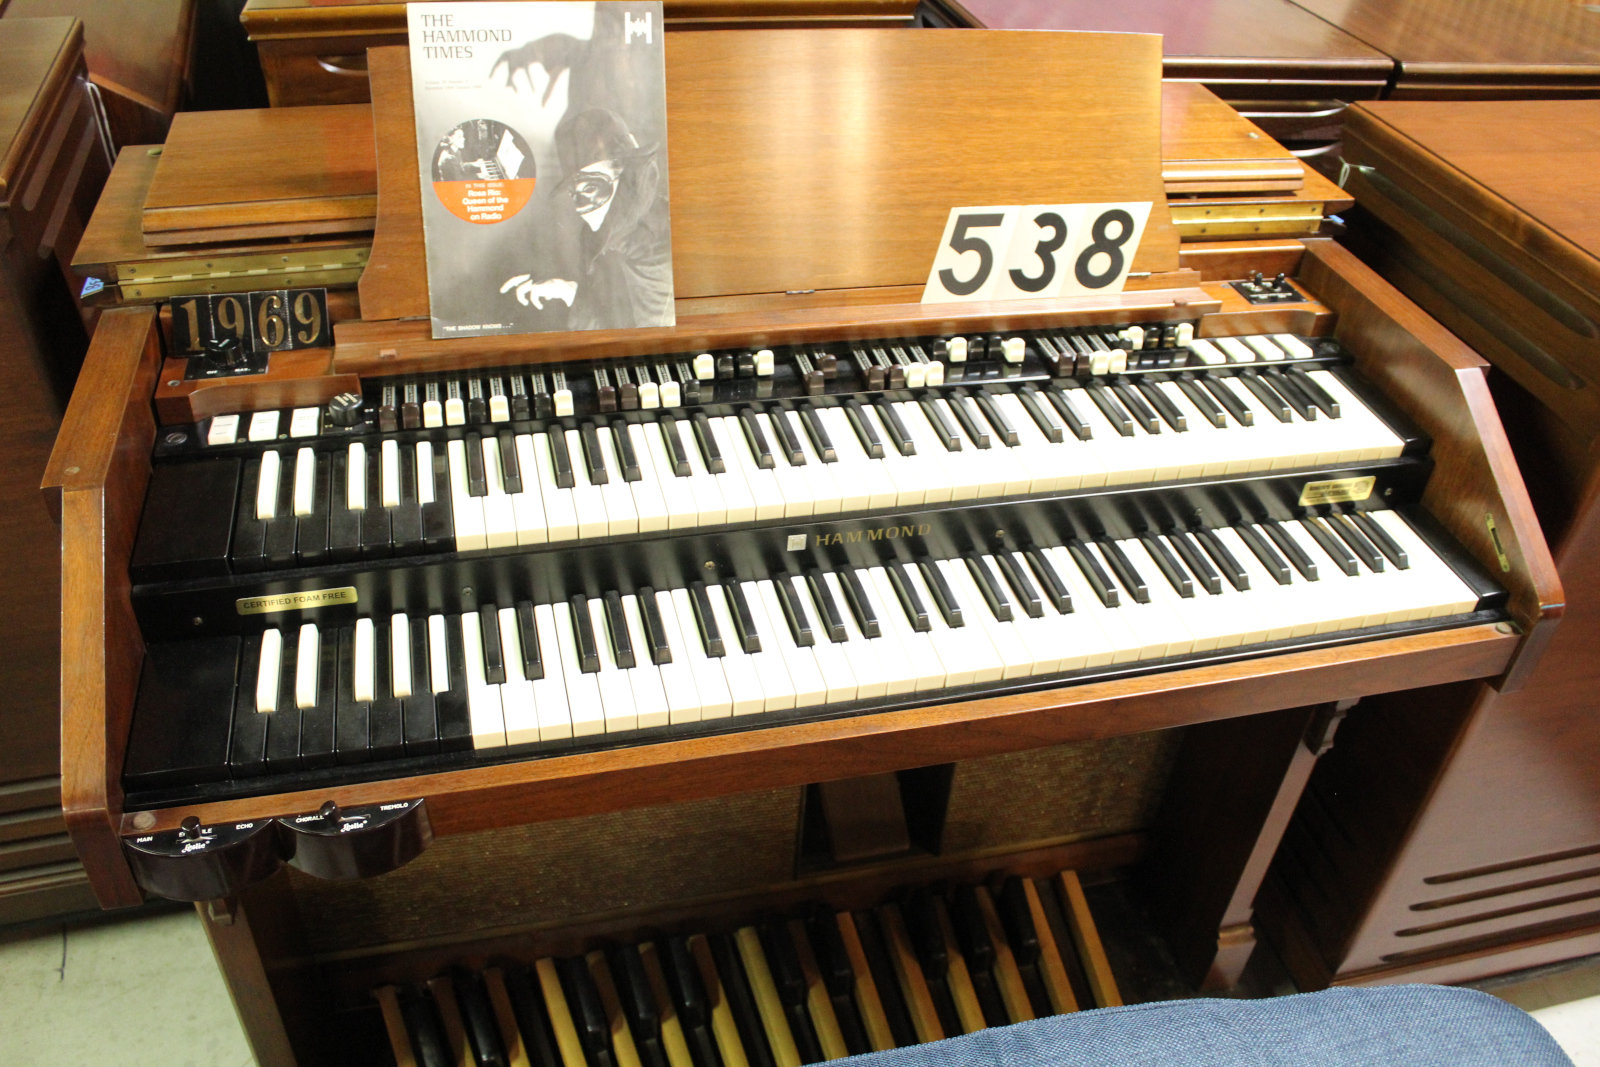 538 is a 1969 Hammond A-105 in almost mint condition! 